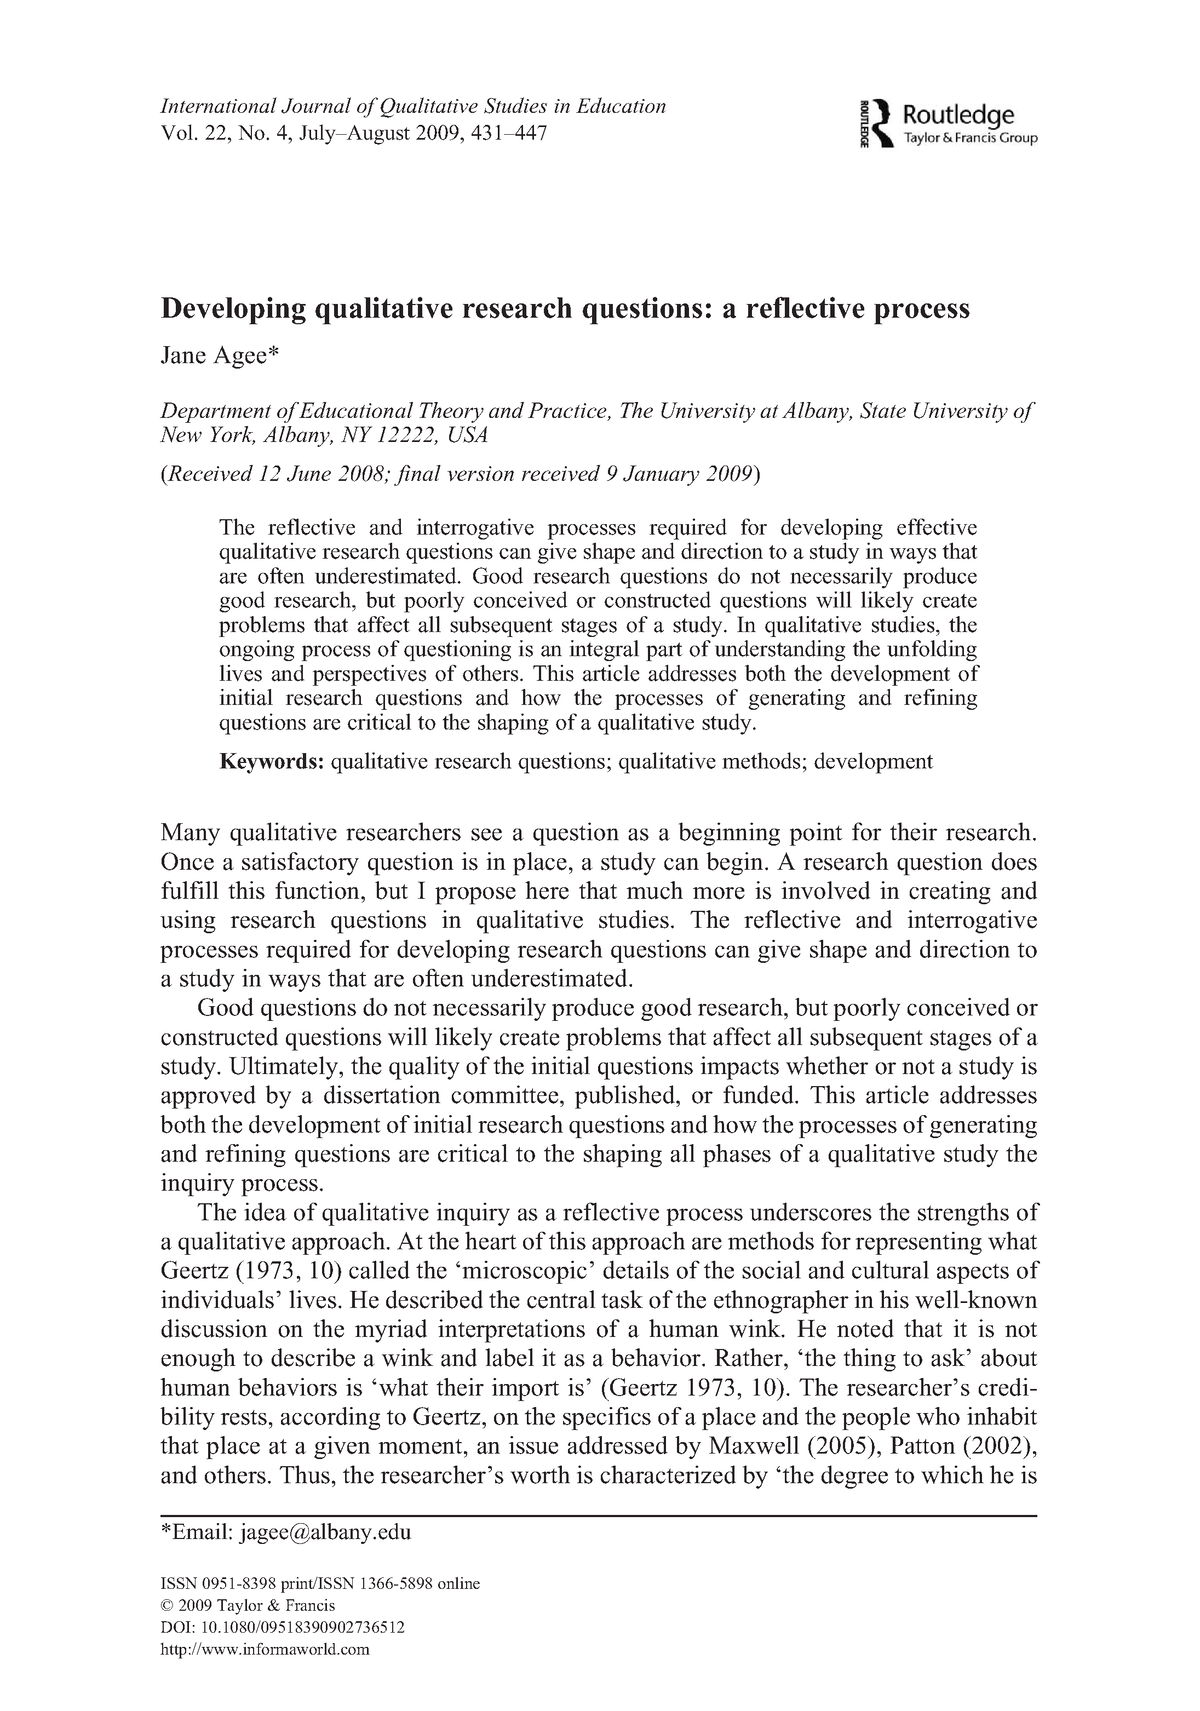 agee 2009 developing qualitative research questions